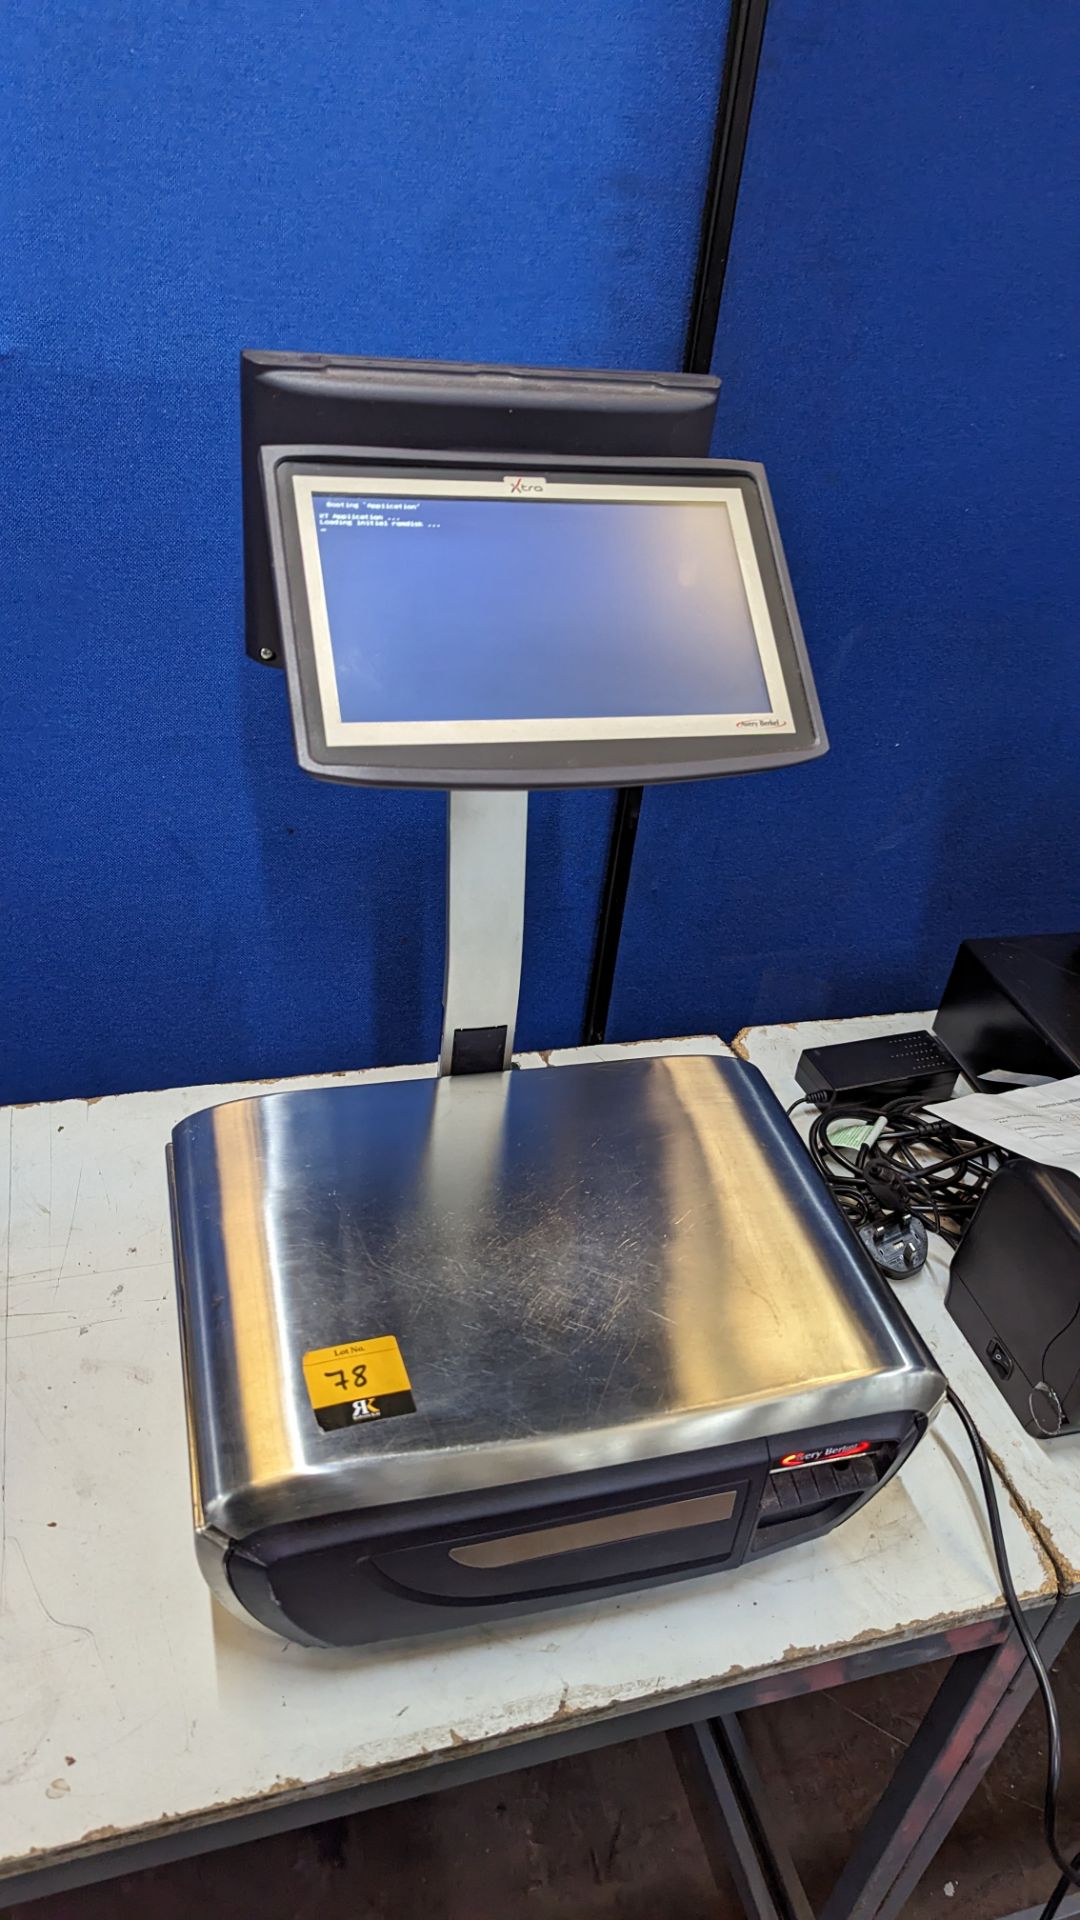 Avery Berkel Xti 400 Label & Receipt printing scale, 6kg/15kg capacity. These scales include a 10" - Image 3 of 16